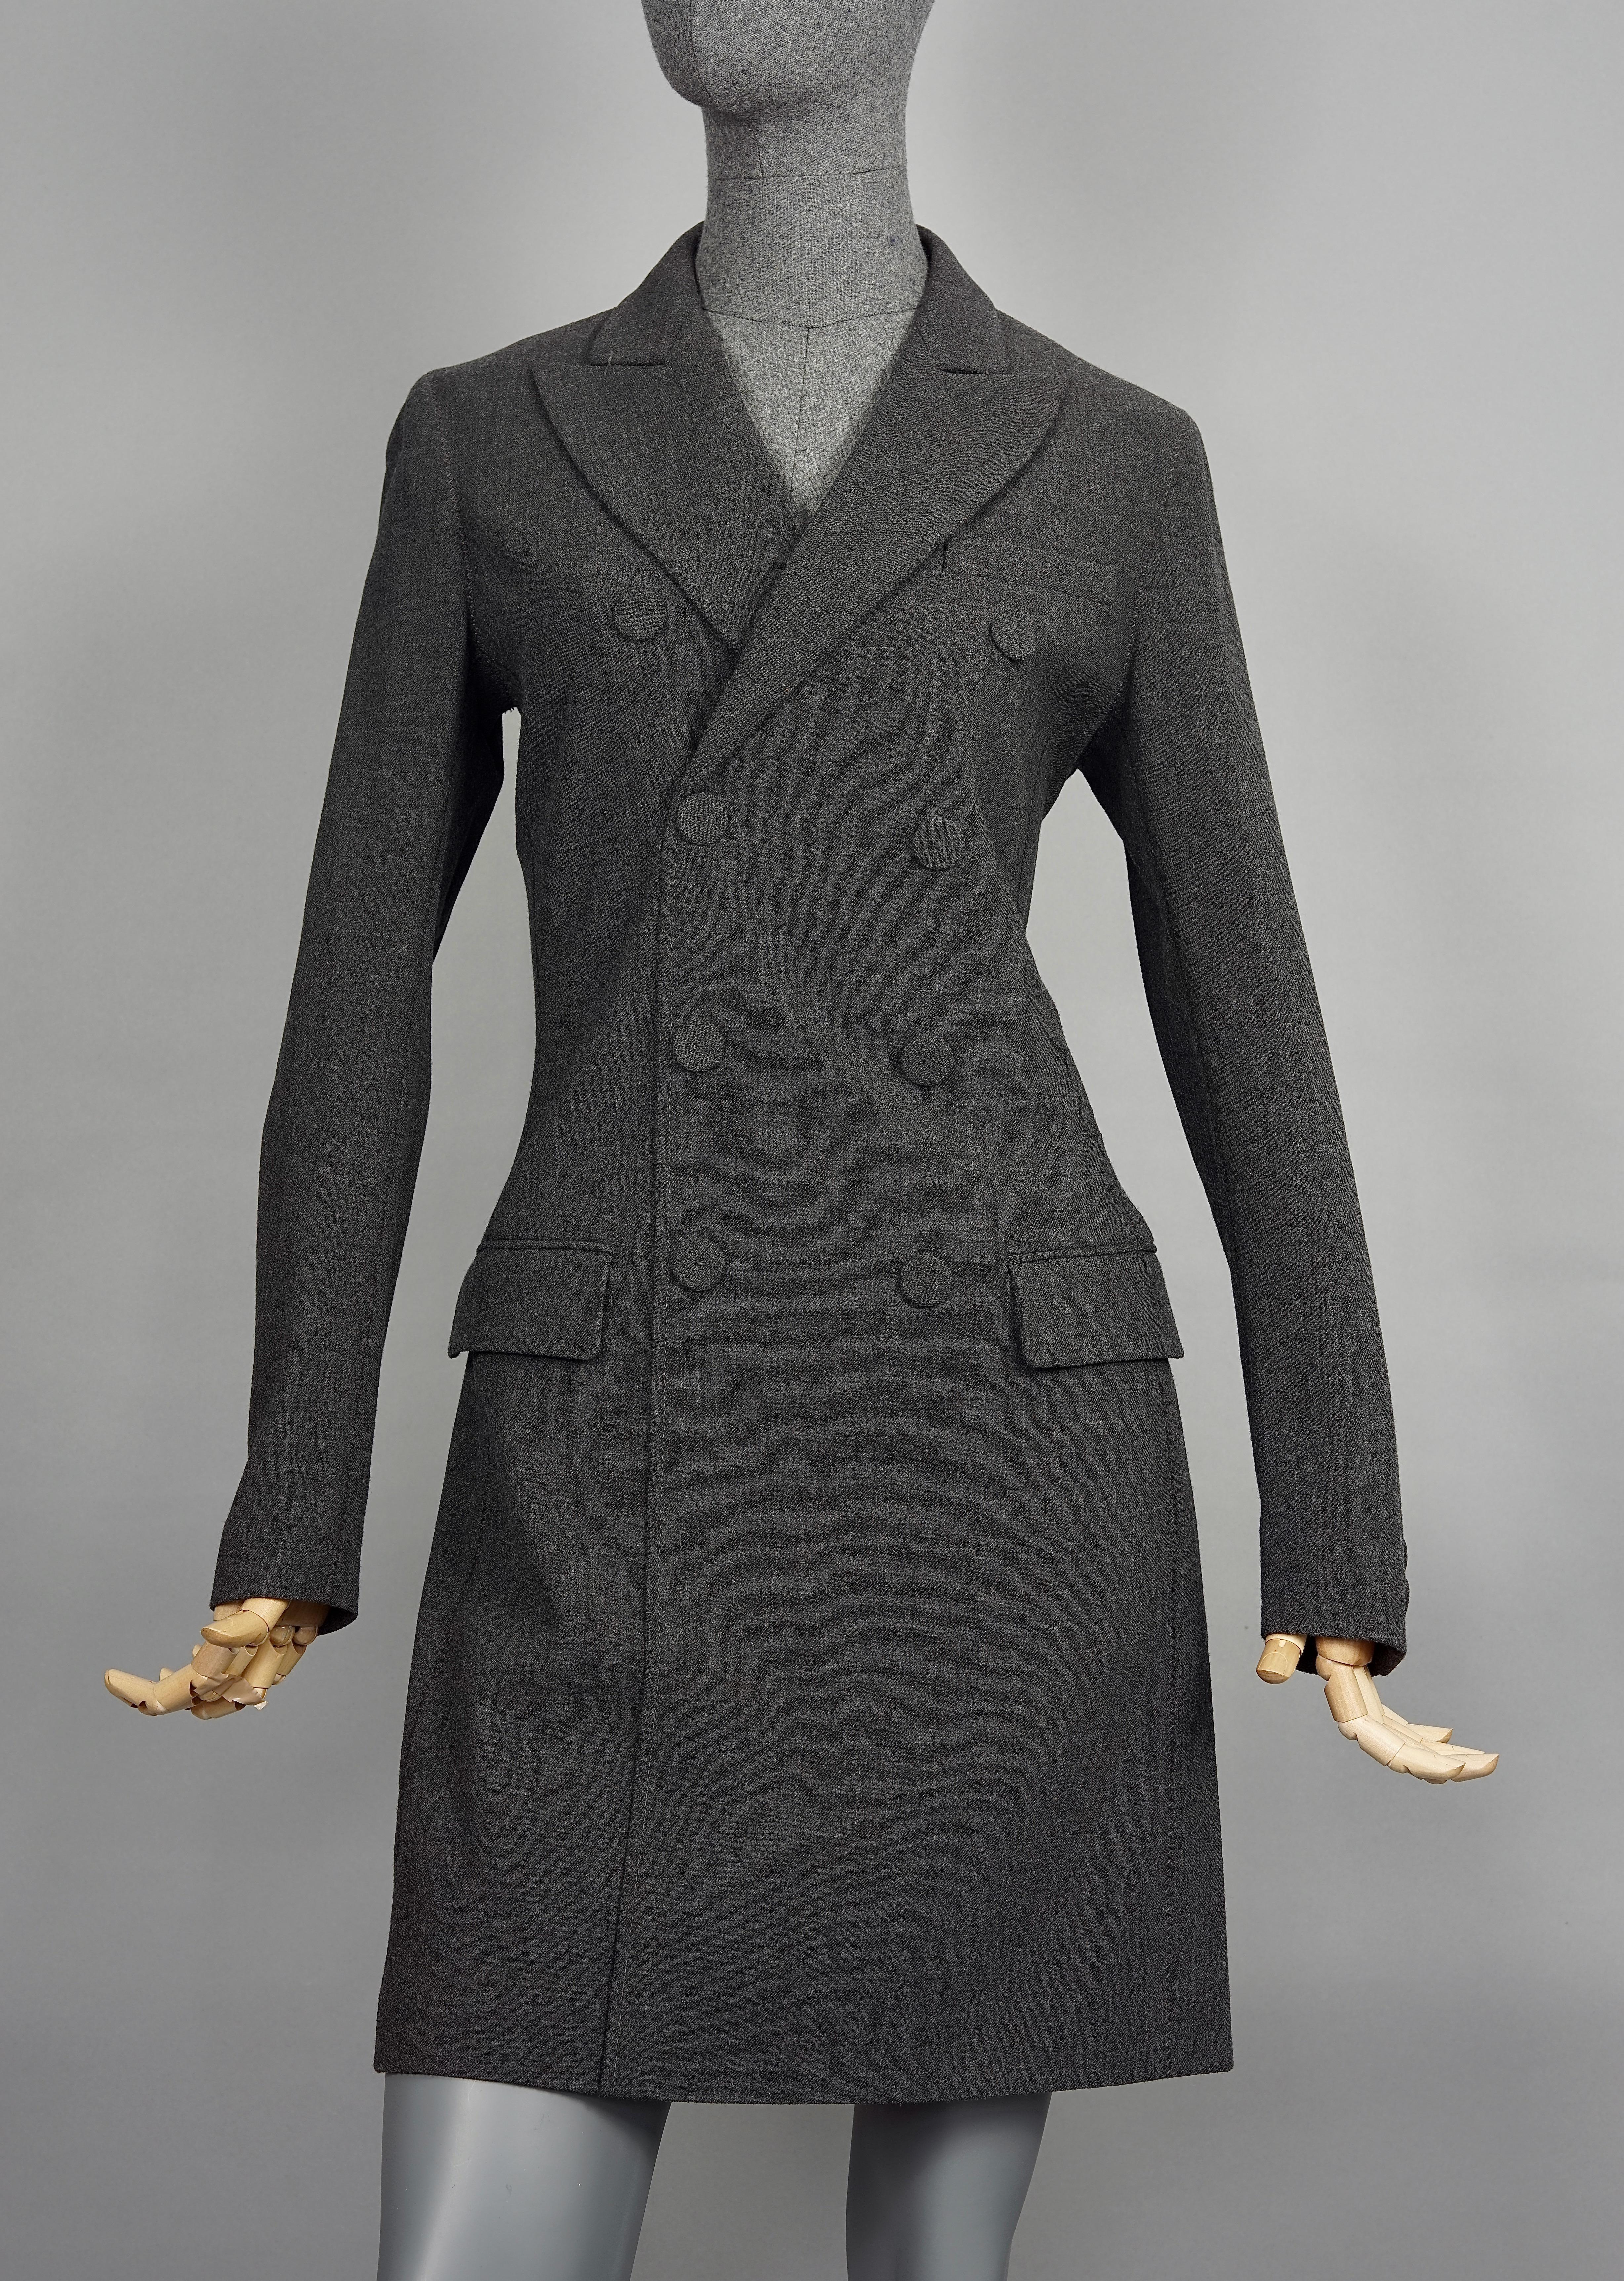 Vintage JEAN PAUL GAULTIER Smoking Double Breasted Wool Dress Suit In Excellent Condition In Kingersheim, Alsace